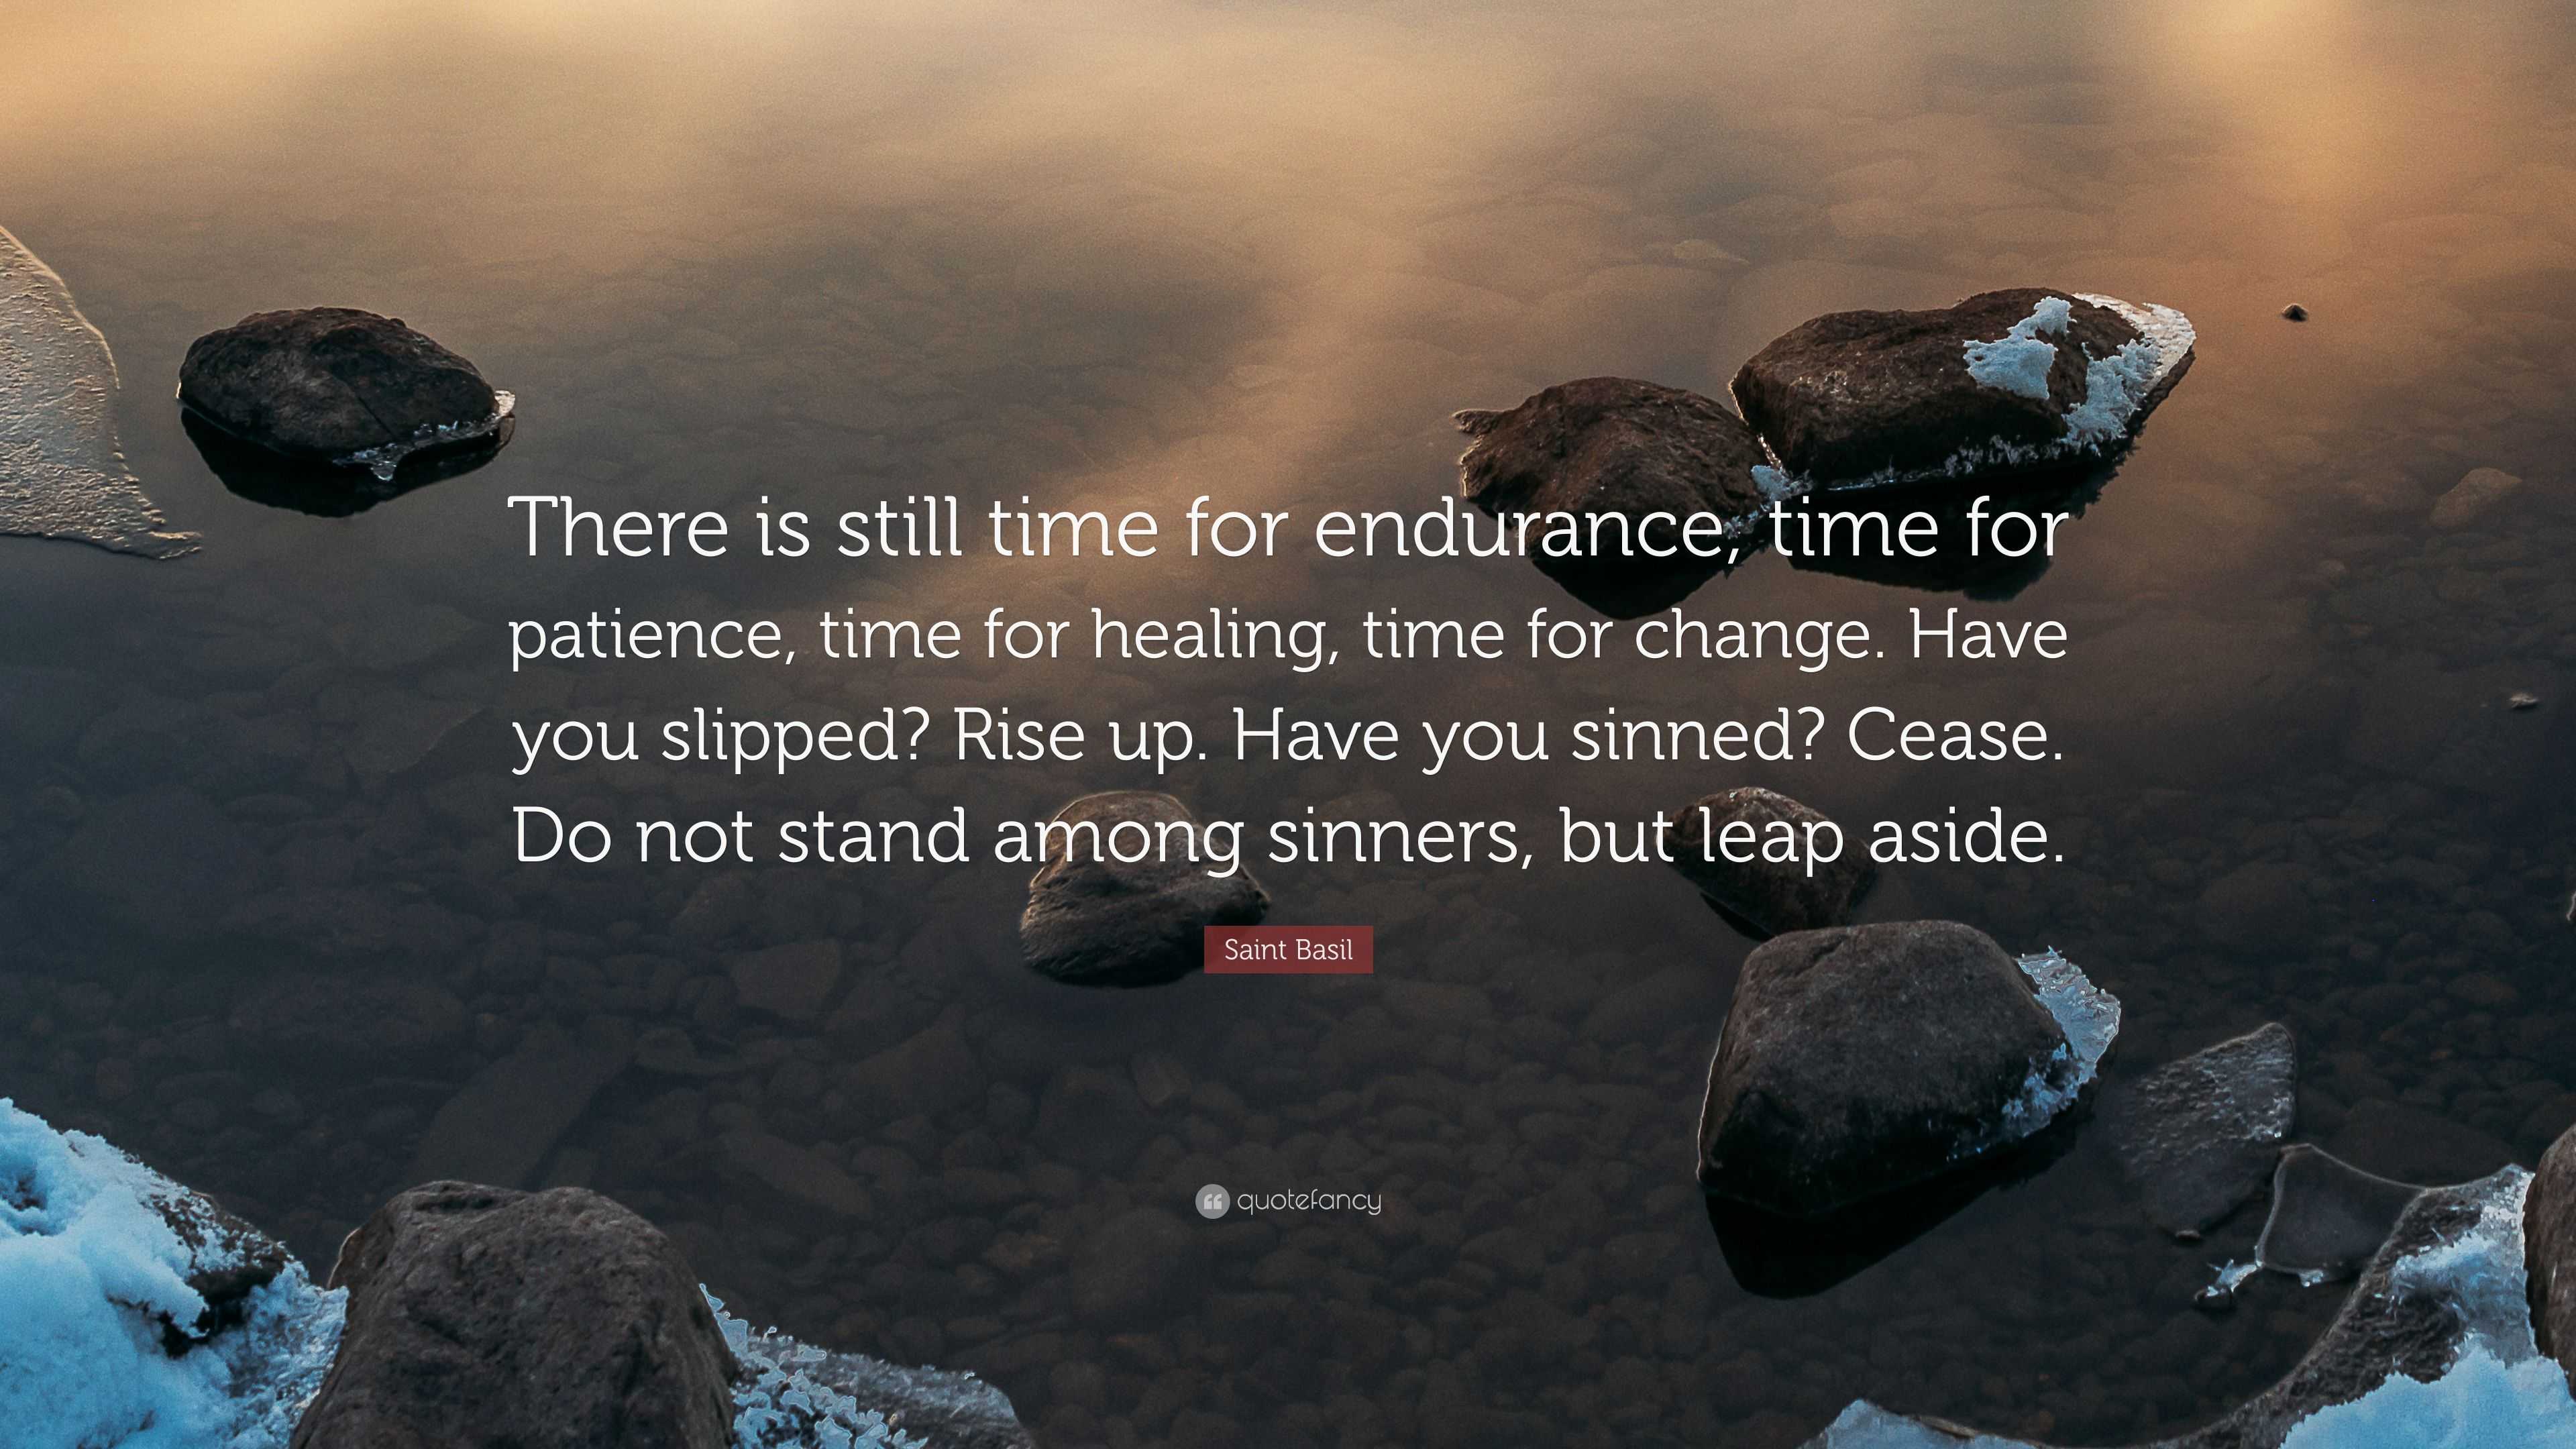 Anvendelse Booth Sund og rask Saint Basil Quote: “There is still time for endurance, time for patience,  time for healing, time for change. Have you slipped? Rise up. Have...”